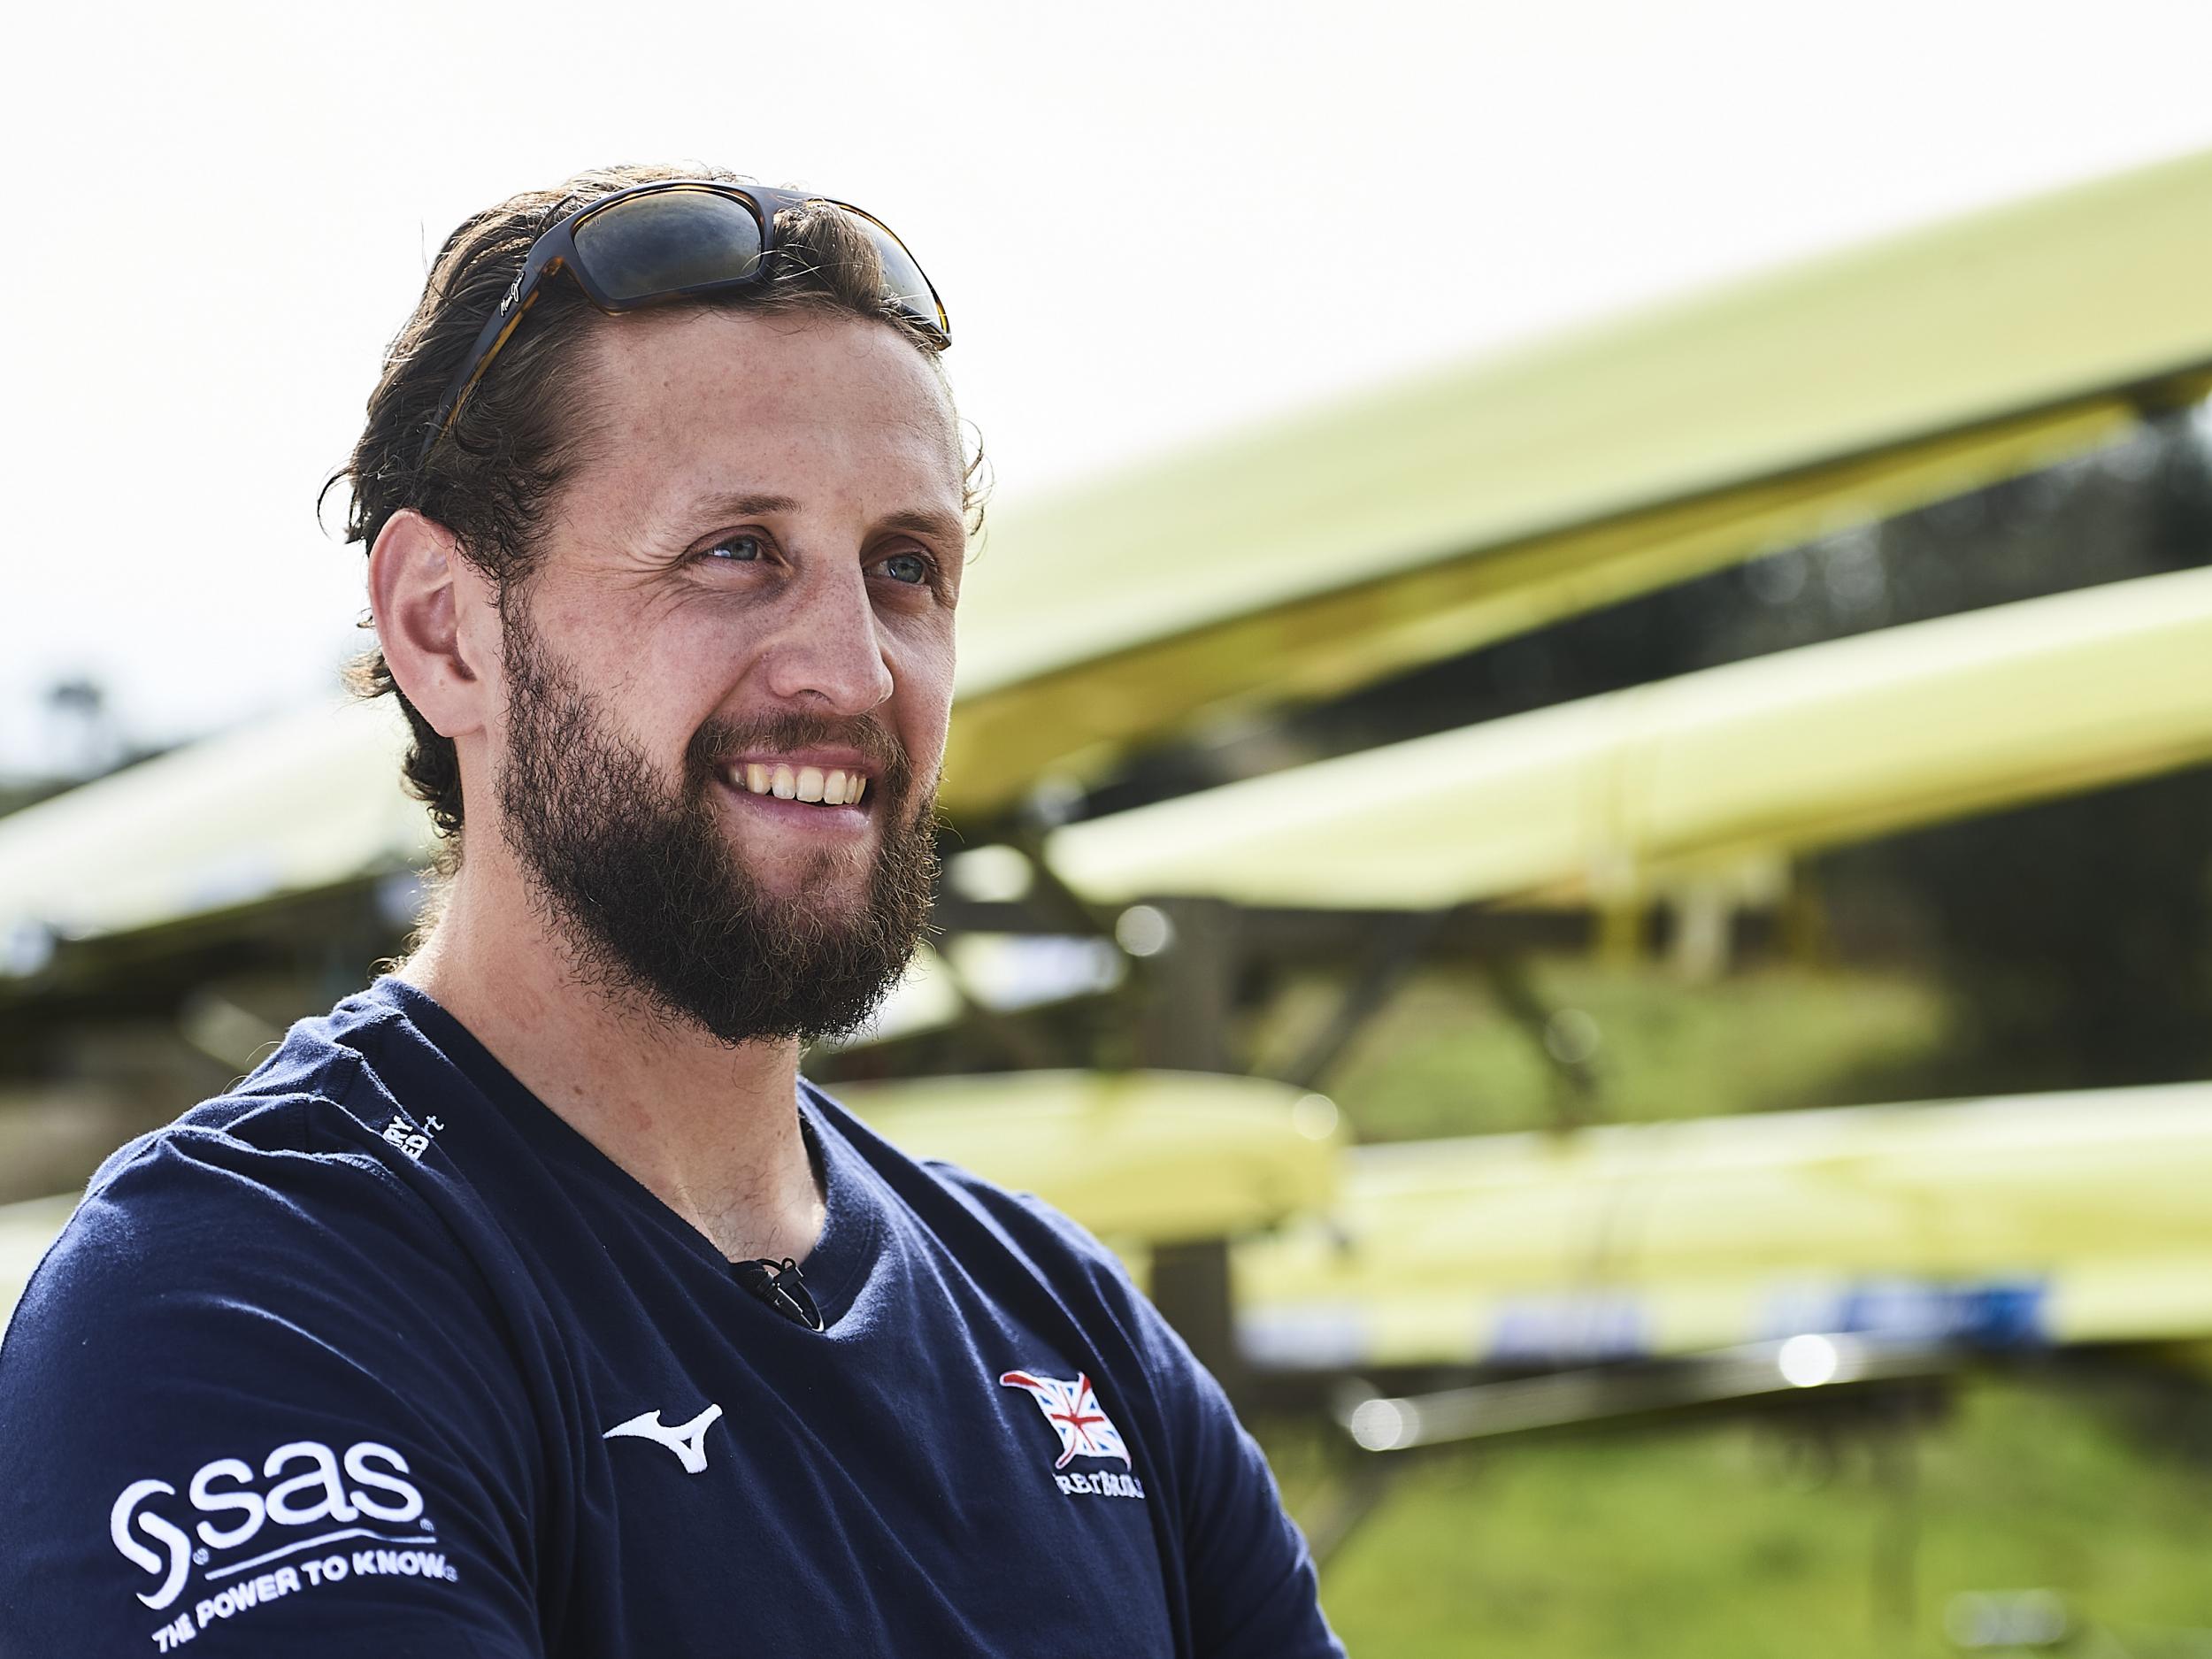 Jacob Dawson is part of a new generation of rowers Grobler hopes can carry on Team GB's success